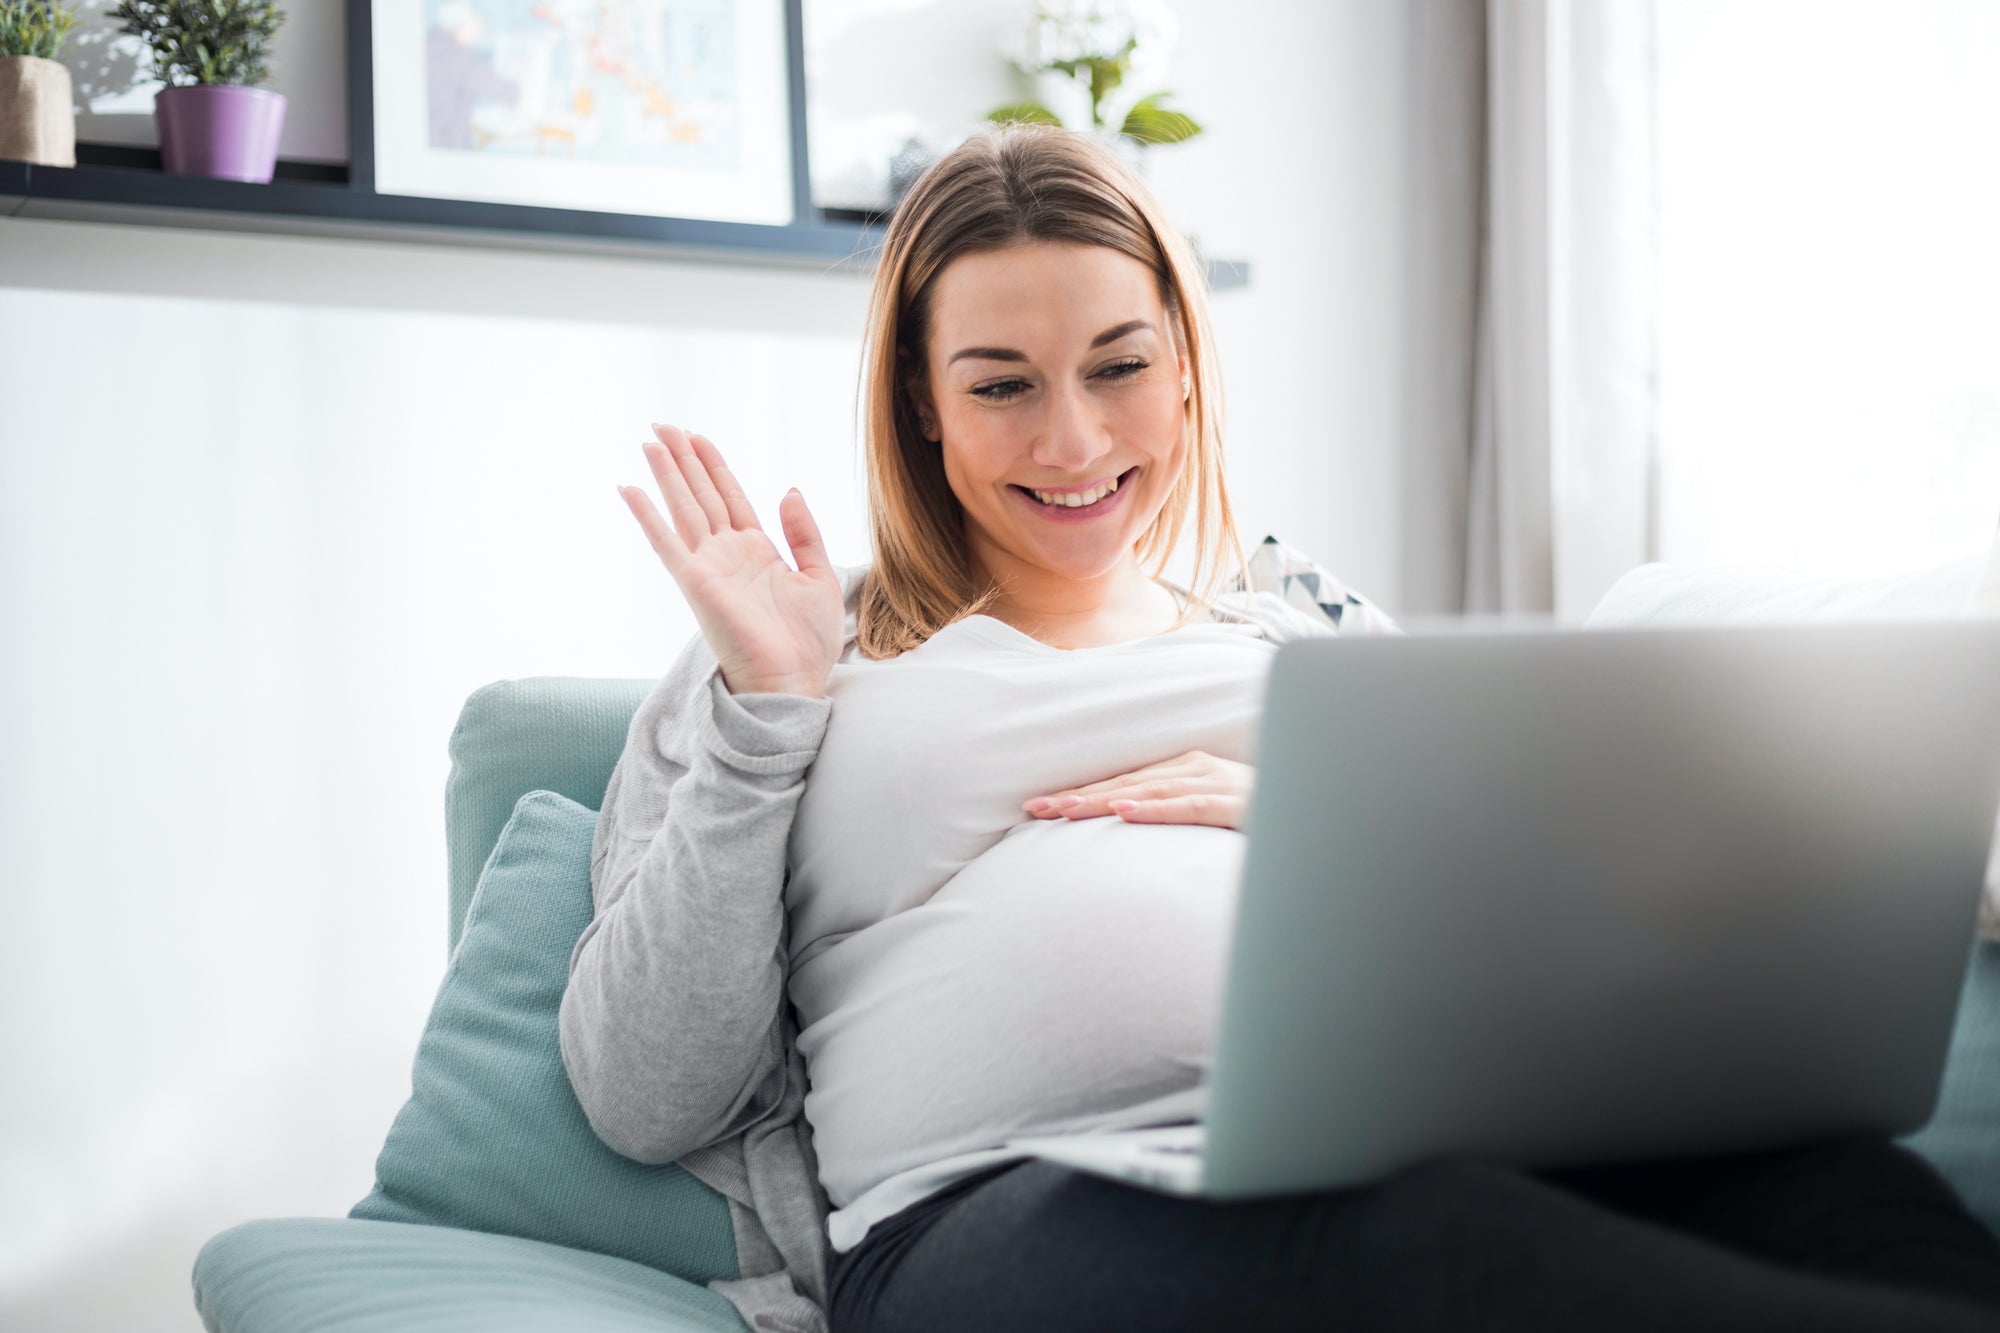 Social Distancing: 3 Ways to Show Love to Soon-to-be Parents from Afar